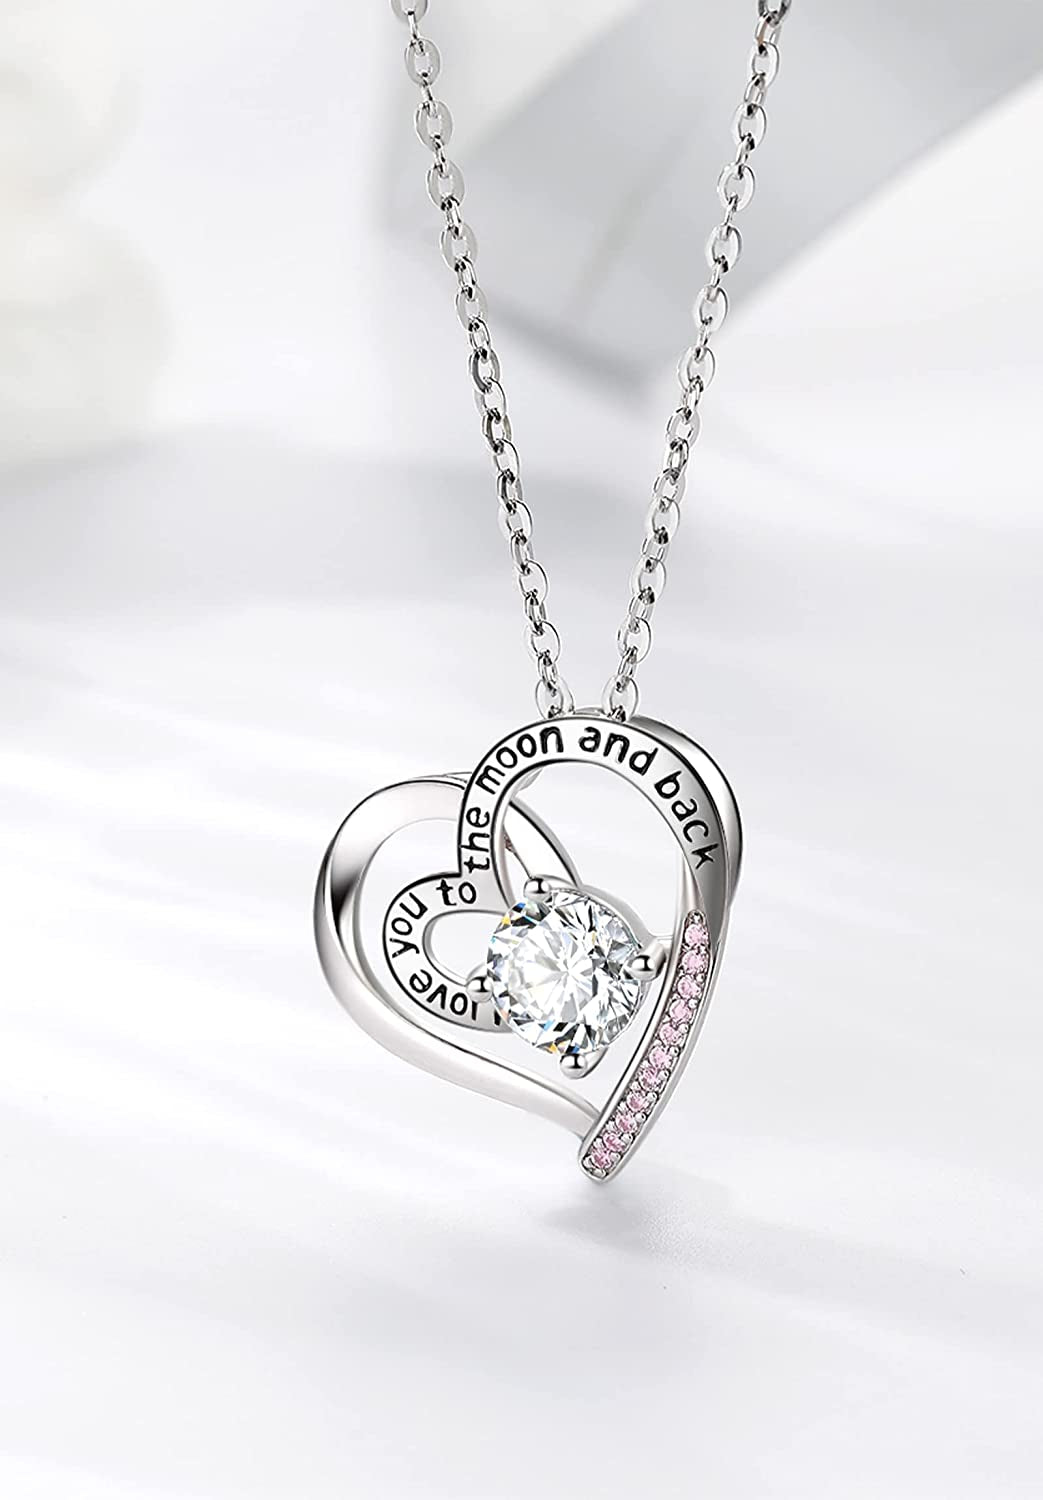 Sterling Silver Heart Pendant Necklace I Love You to the Moon and Back Infinity Jewelry for Women, Mother, Daughter - 18 Inch Chain